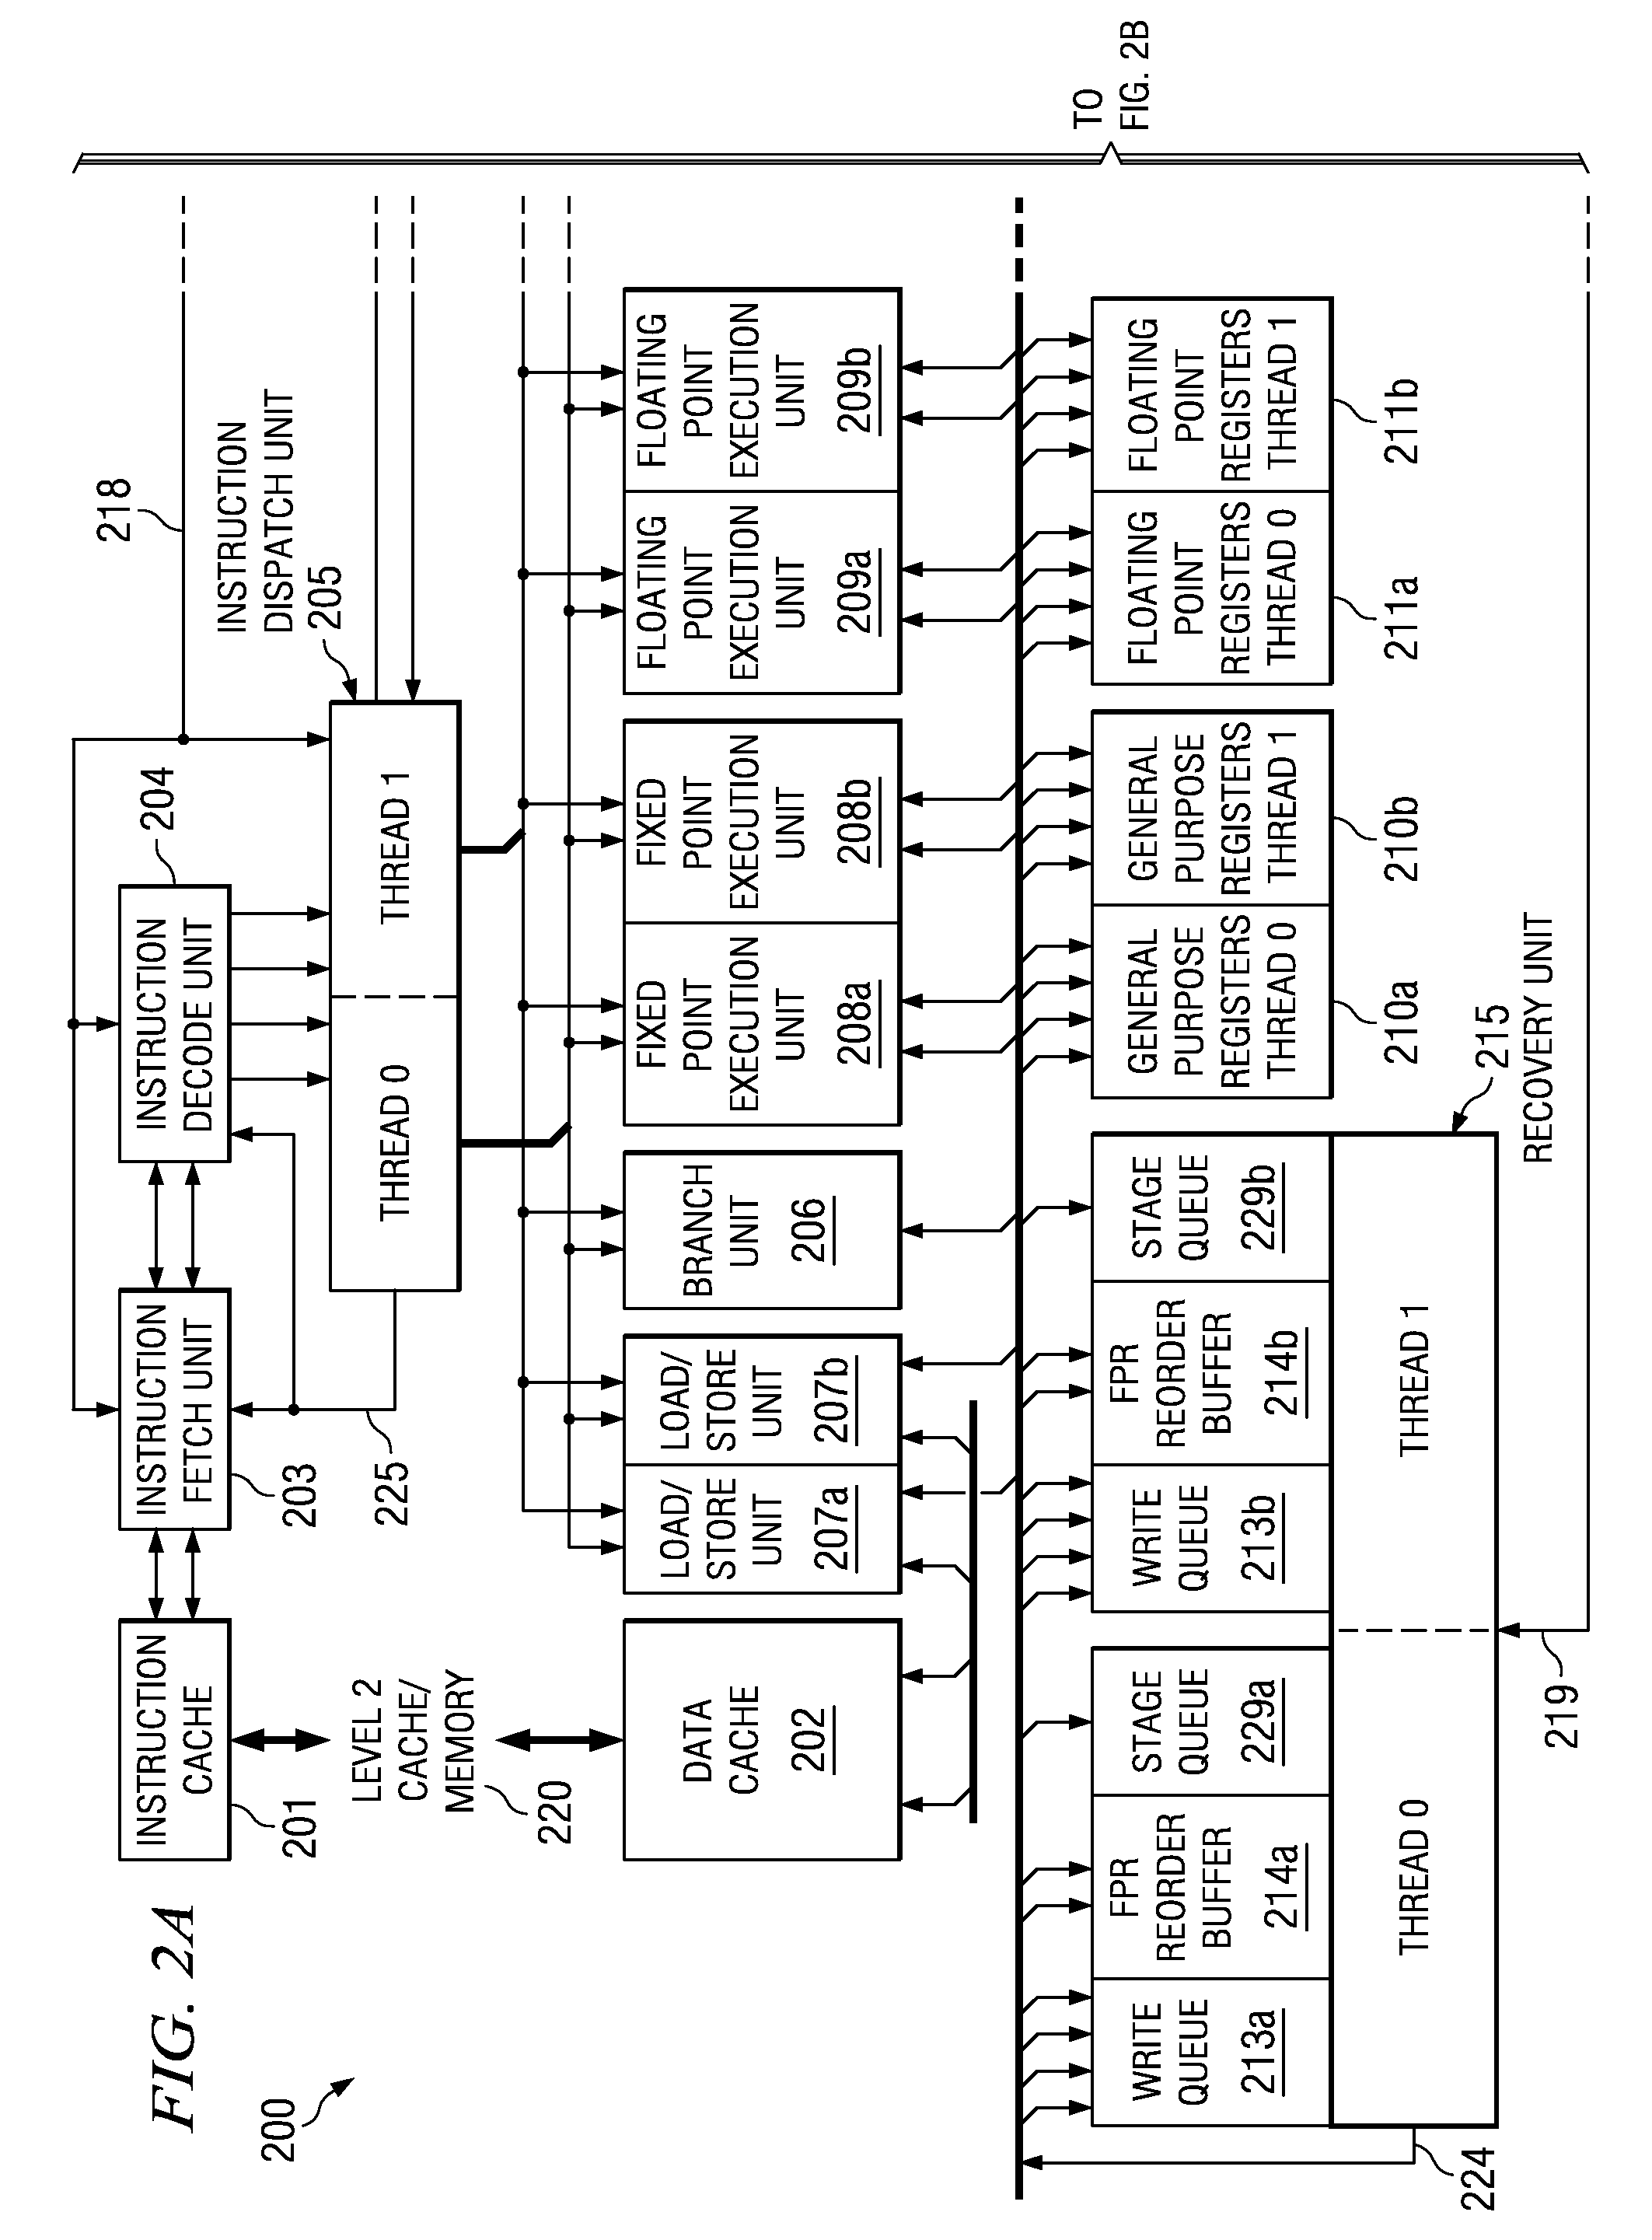 System and method for optimizing branch logic for handling hard to predict indirect branches